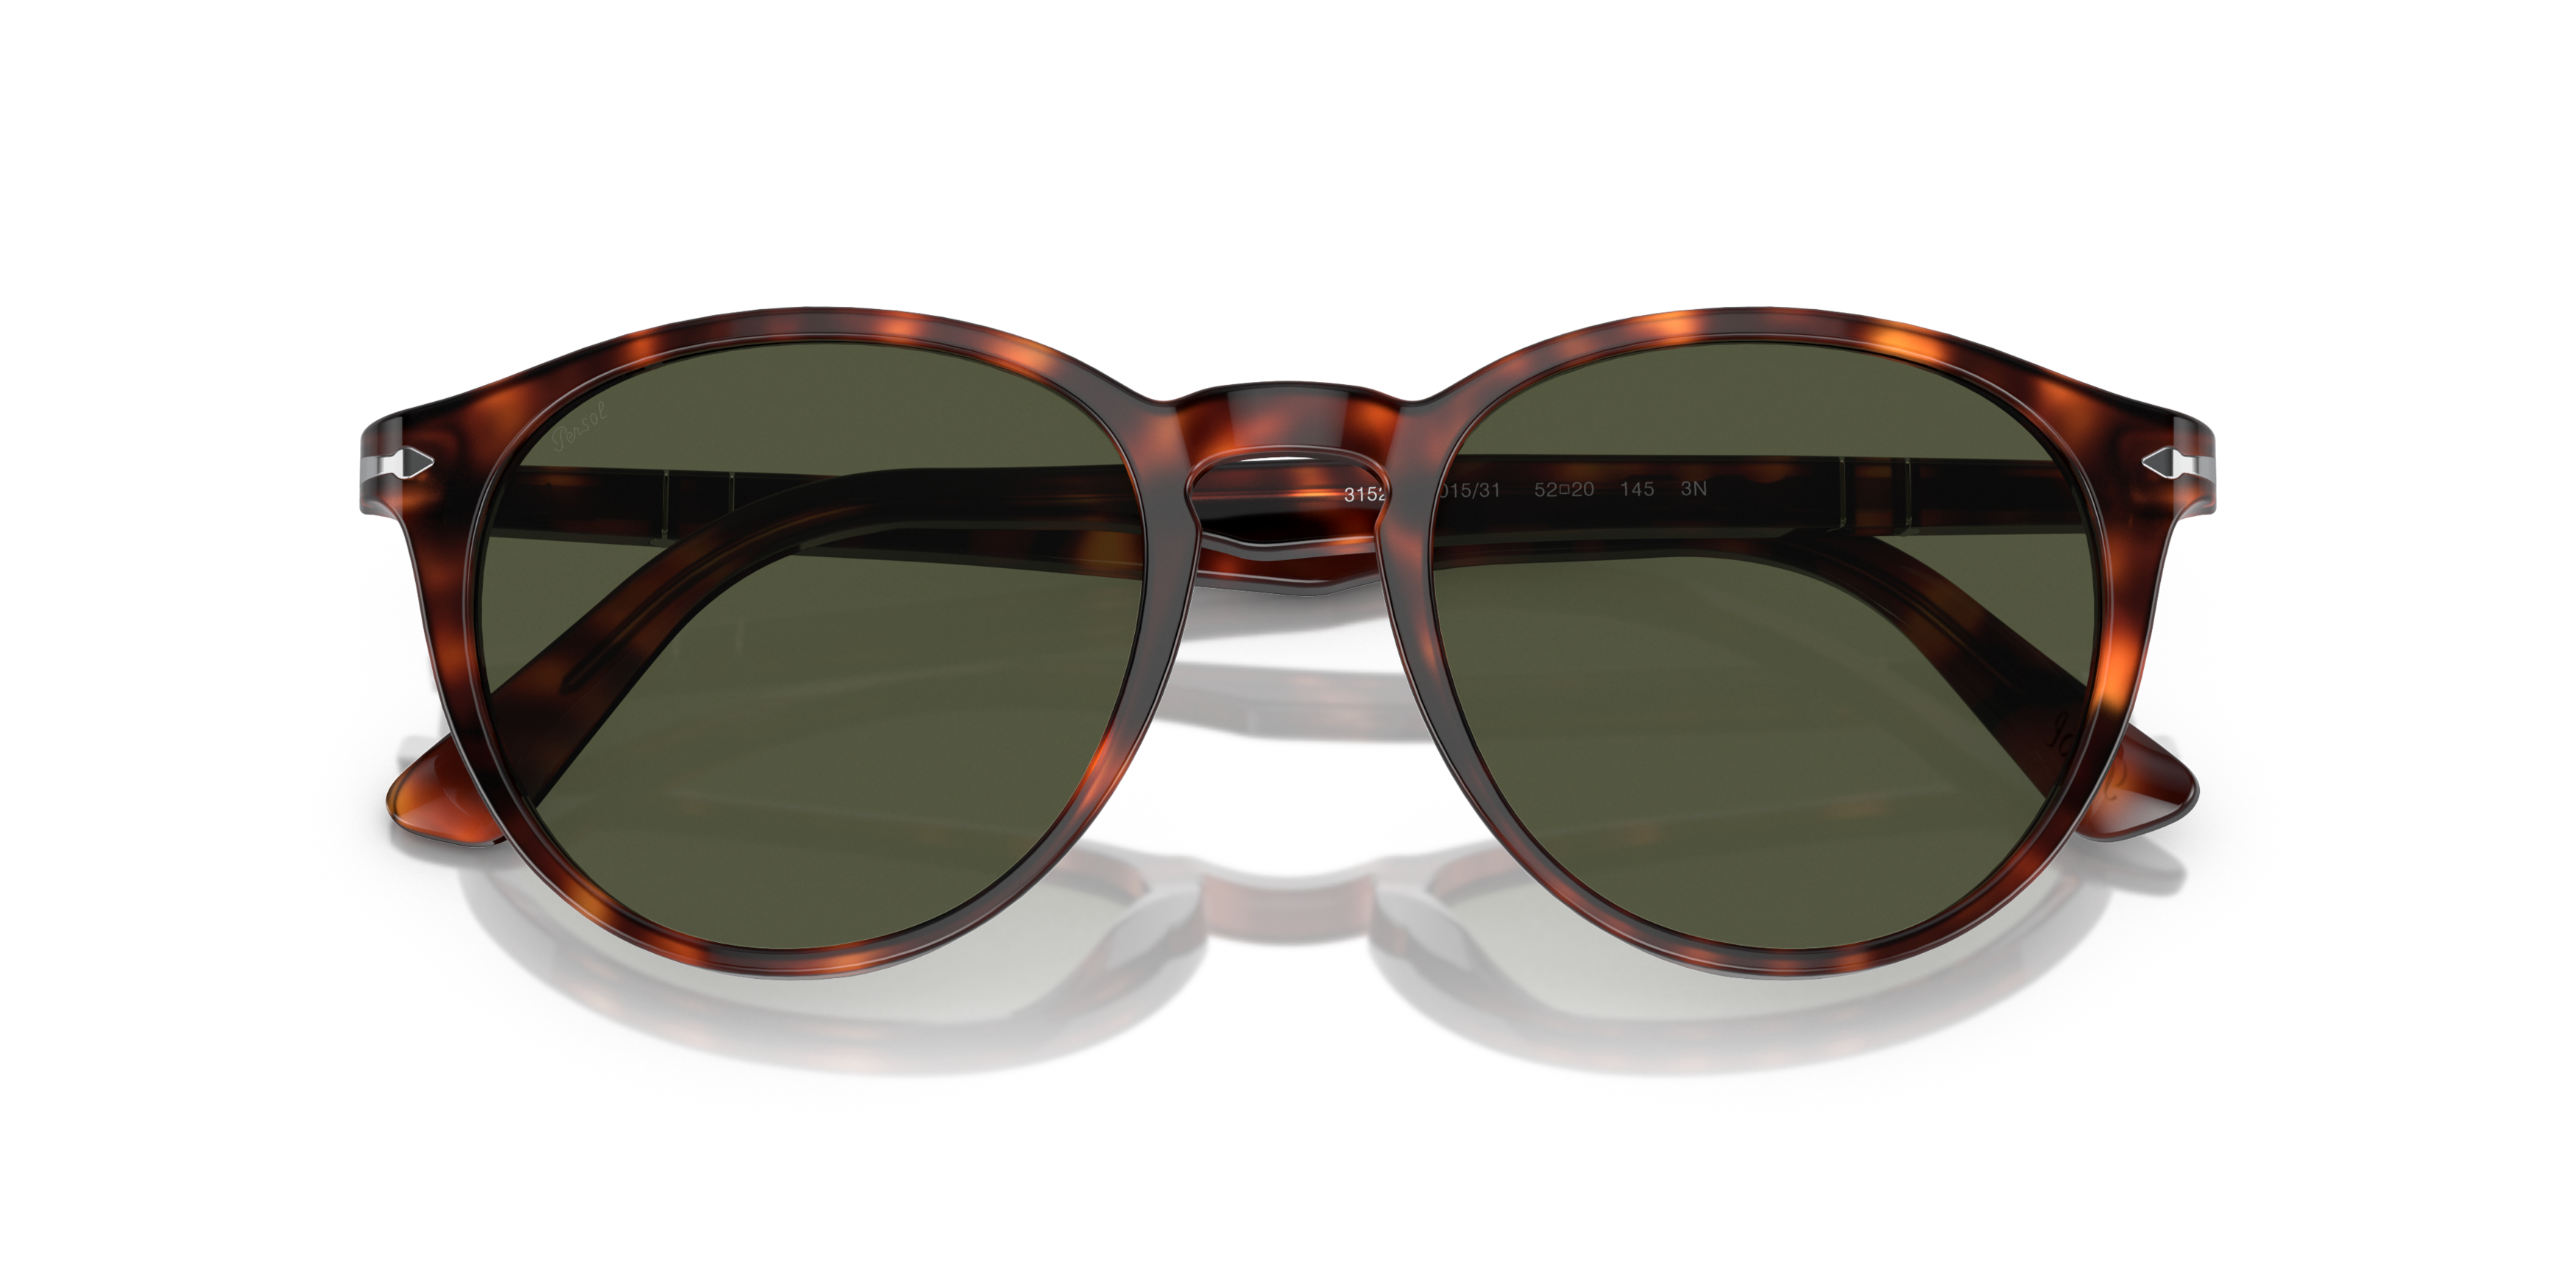 [products.image.folded] Persol PO3152S 901531